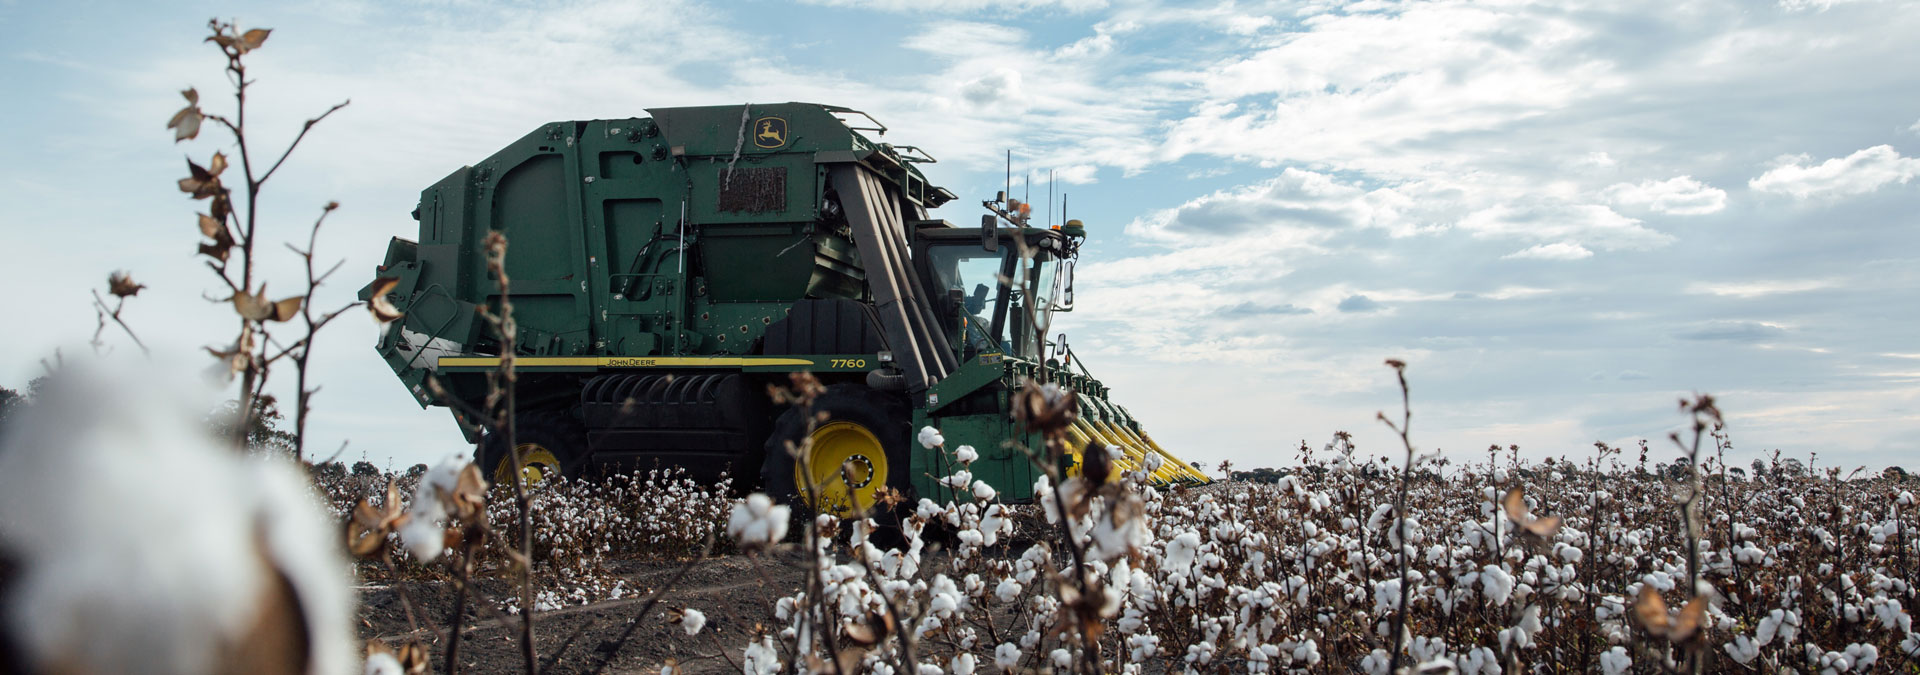 Largescale Farming Cotton in the USA